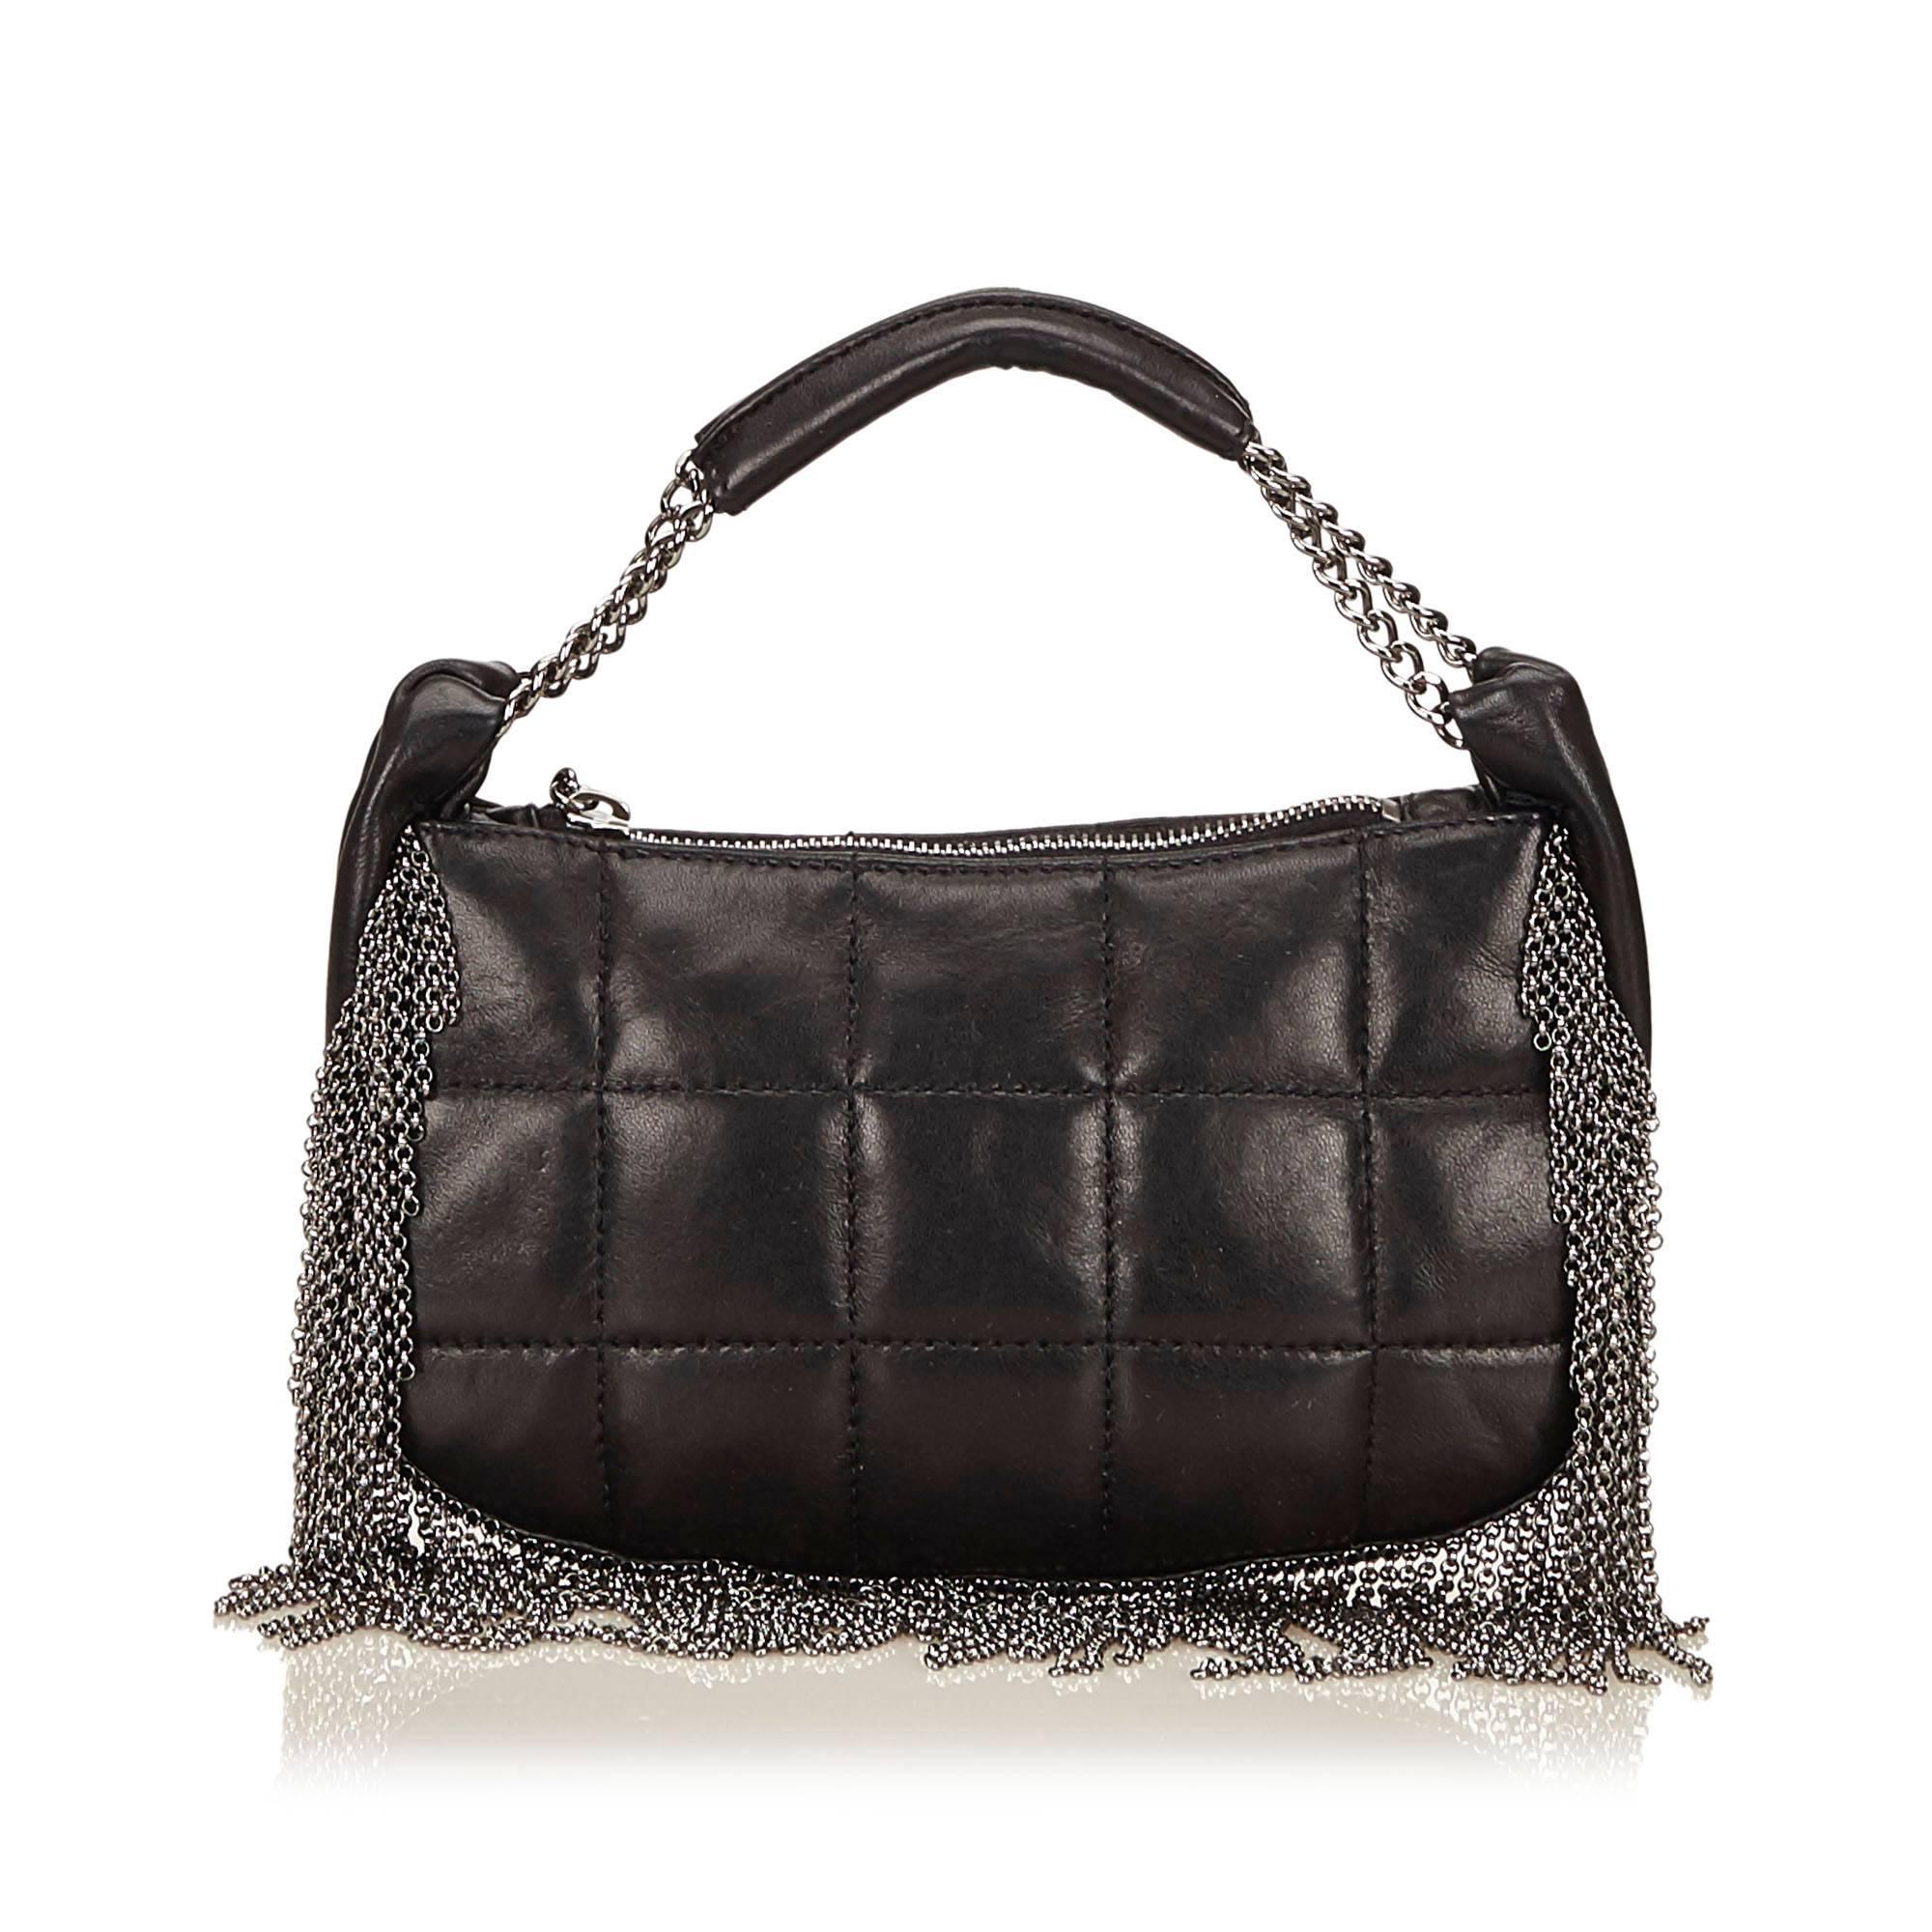 Product details:  Chocolate brown quilted lambskin leather shoulder bag by Chanel.  Accented with metal fringe.  Single shoulder strap.  Top zip closure.  Lined interior with inner pockets.  Silvertone hardware.  Dust bag included.  8.75